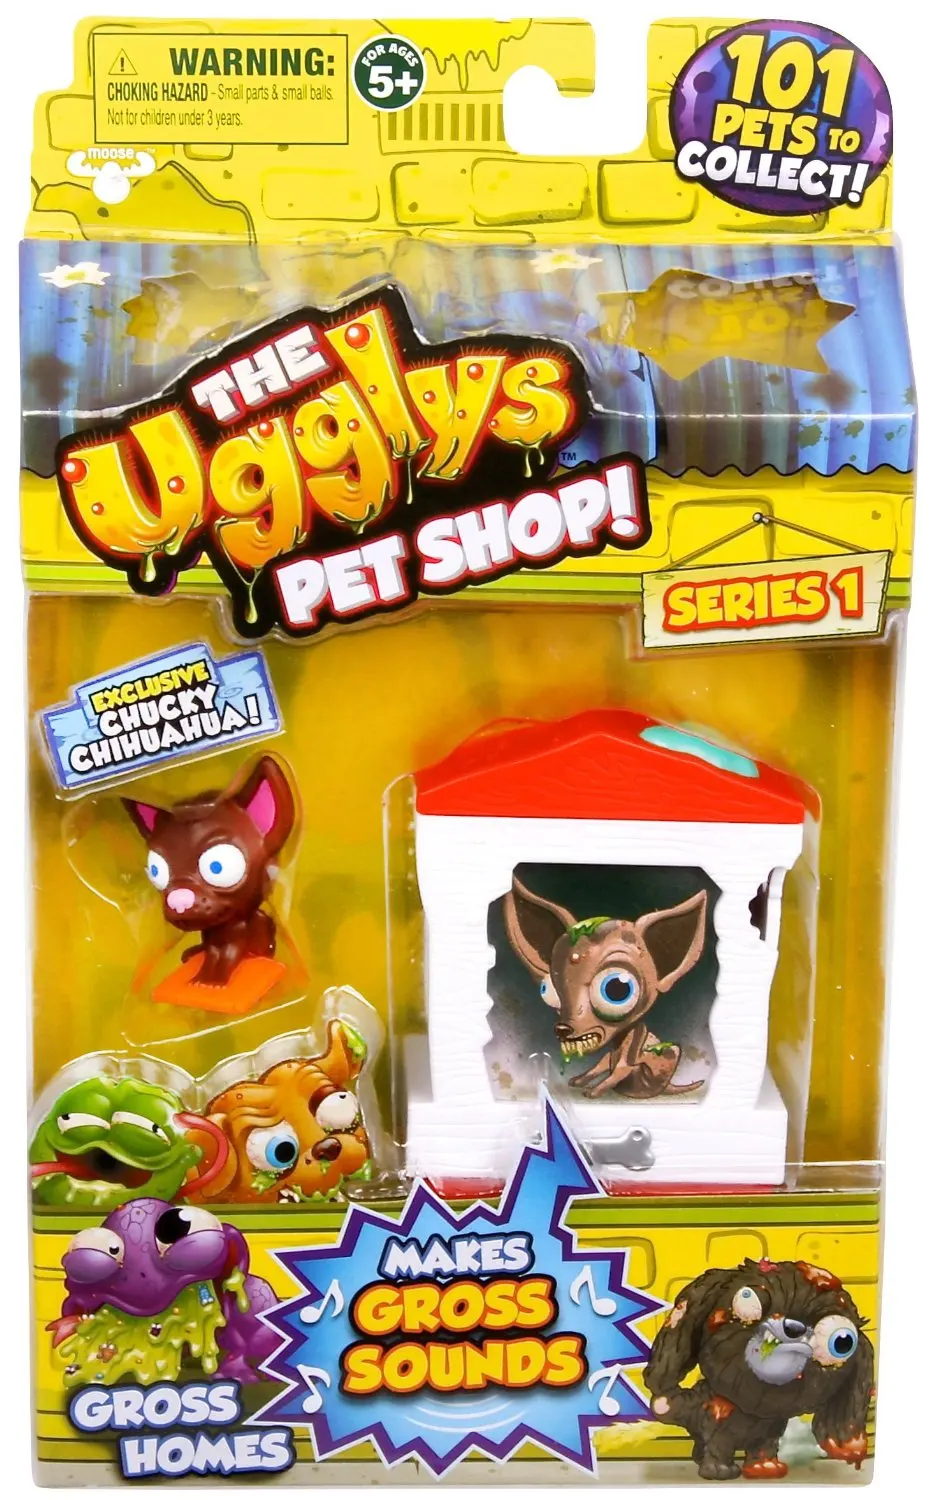 The Ugglys Pet Shop! Bone Home with Exclusive Chucky Chih Series 1 Gross Homes